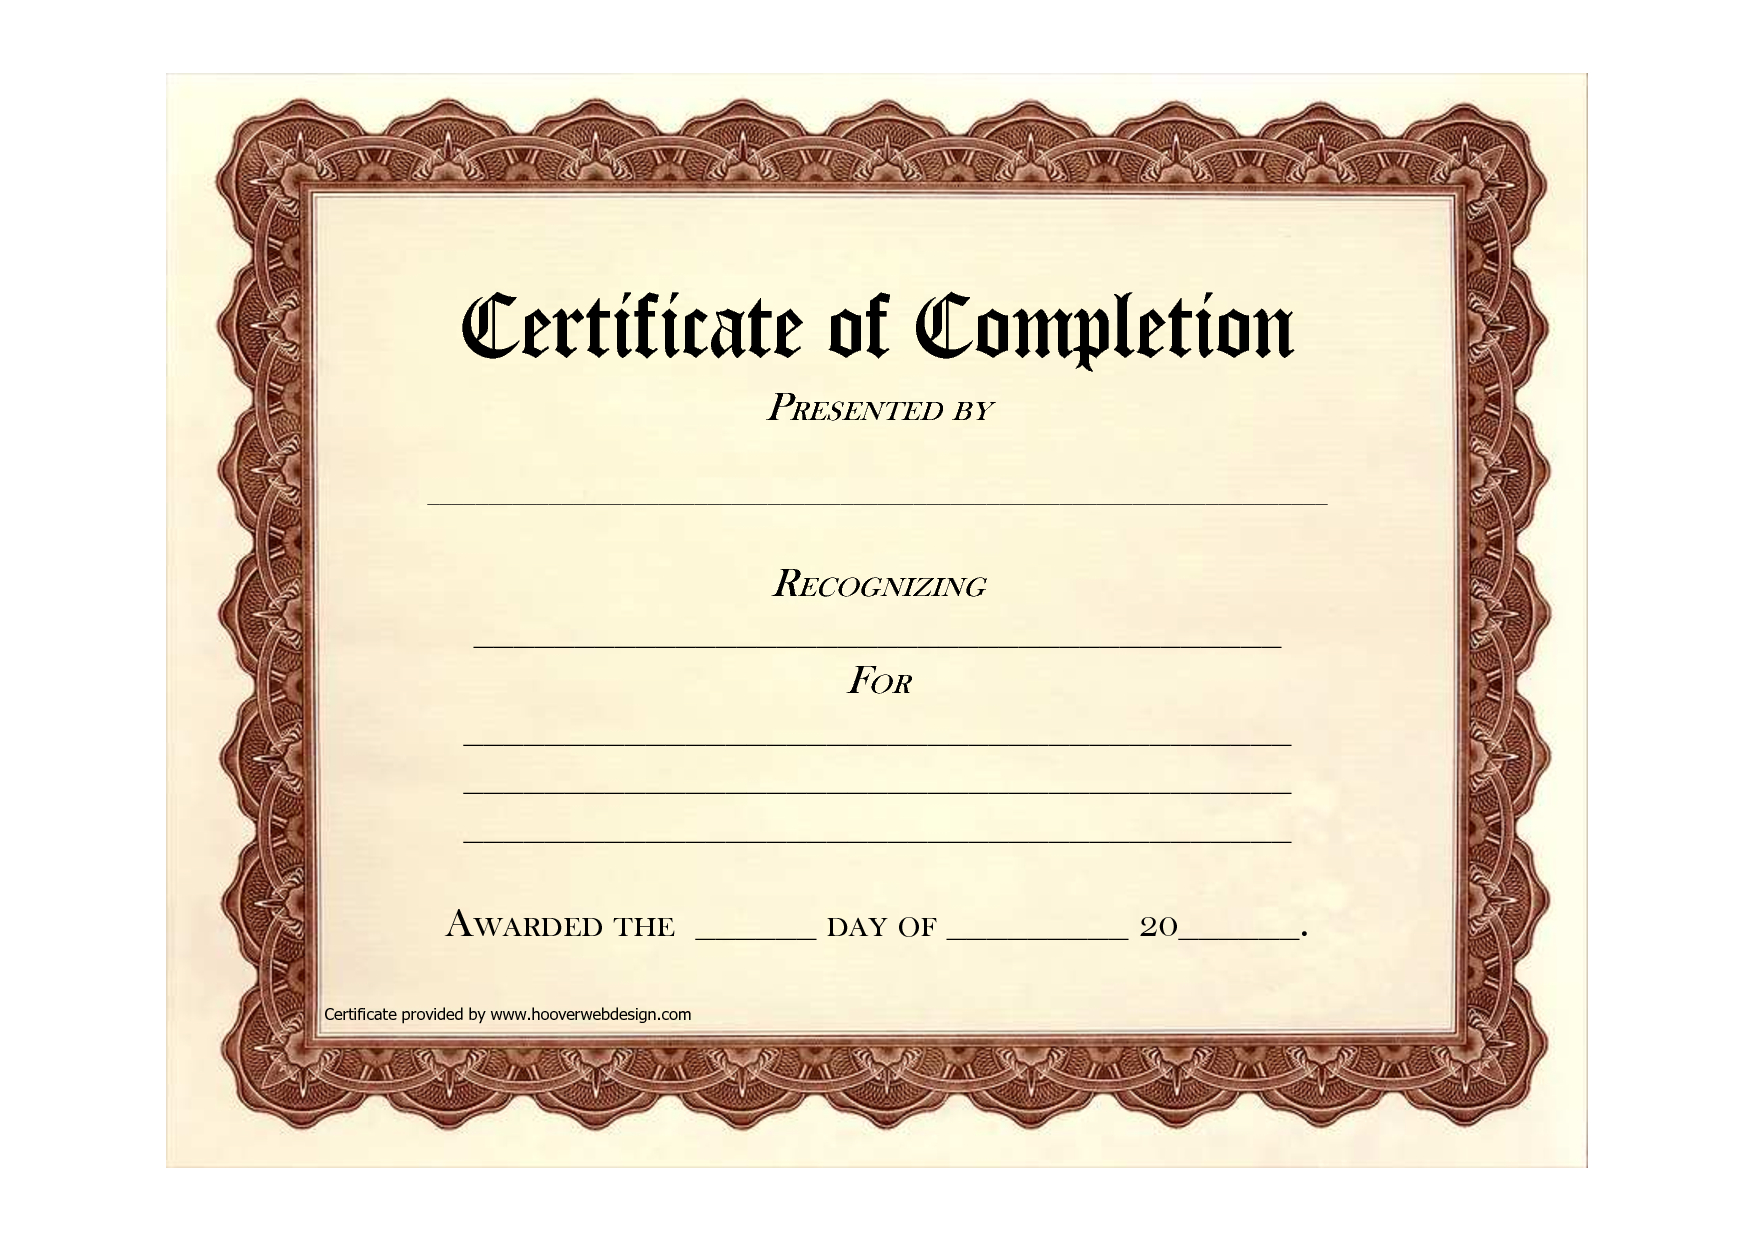 10 Certificate Of Completion Templates Free Download Images With Regard To Free Completion Certificate Templates For Word